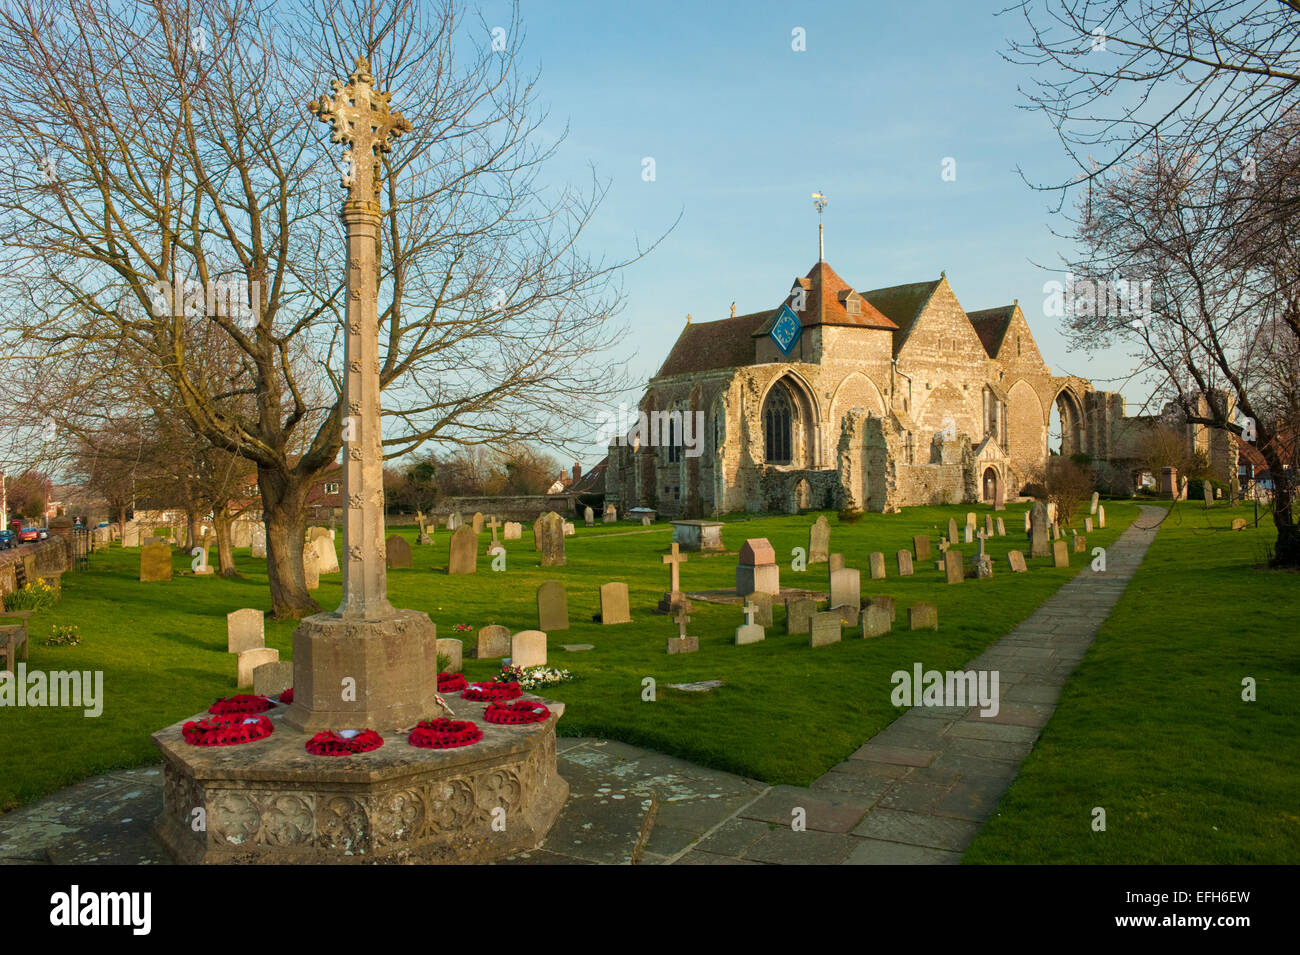 The parish church of St Thomas the Martyr at Winchelsea, east Sussex. One of the ancient, cinque ports. Stock Photo